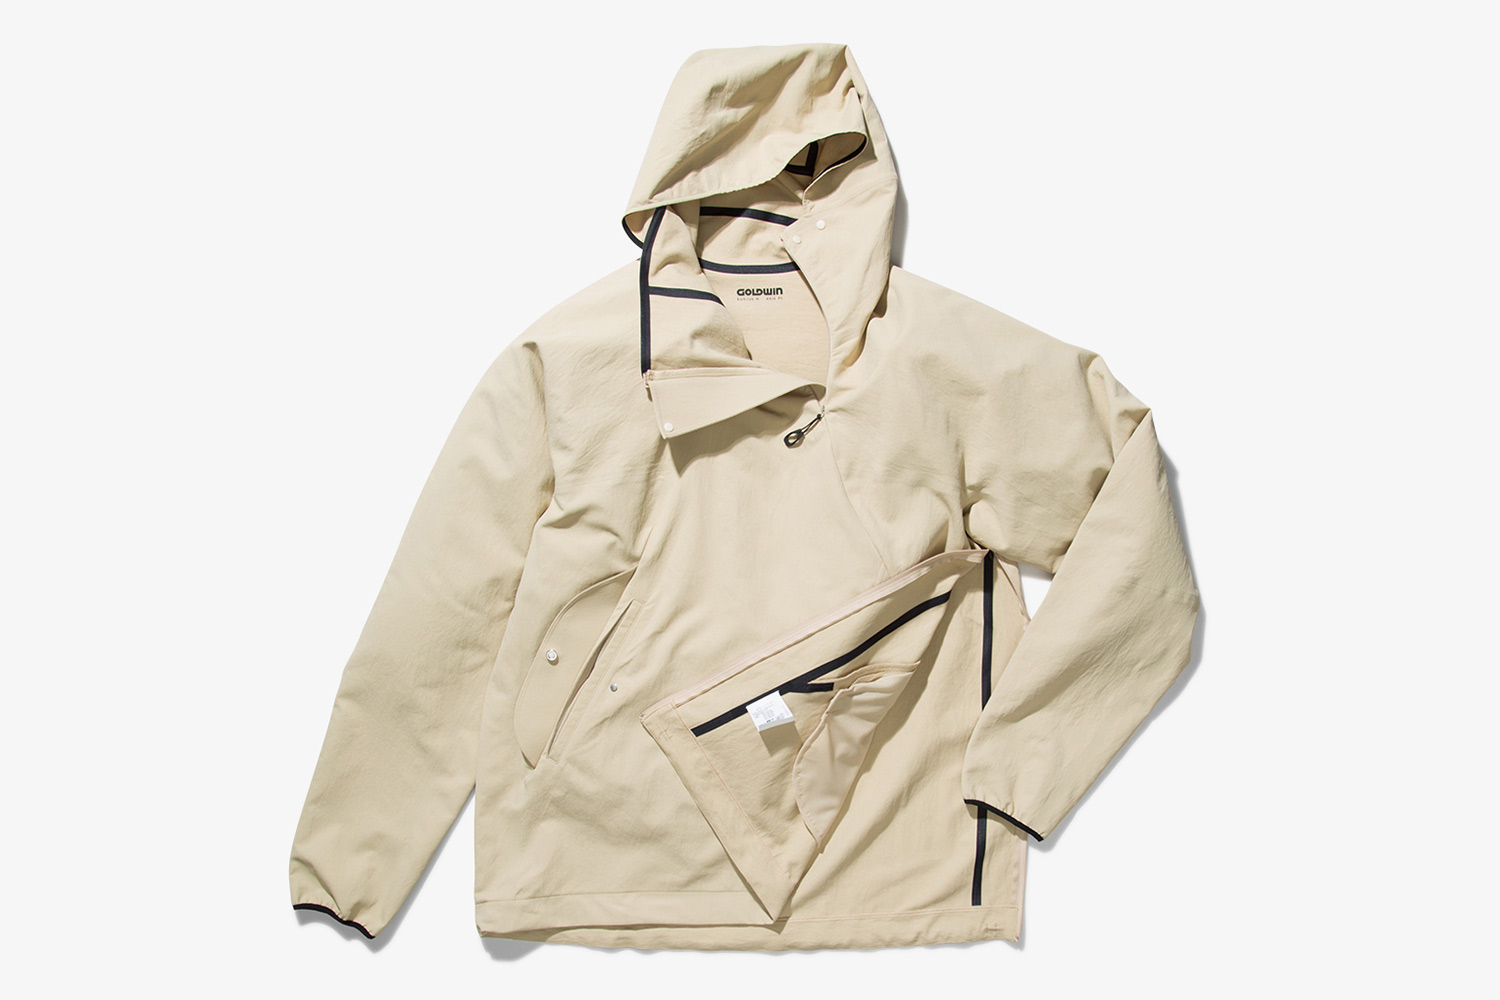 The Best Men's Anorak - The One Jacket Every Modern Outdoor Woman 